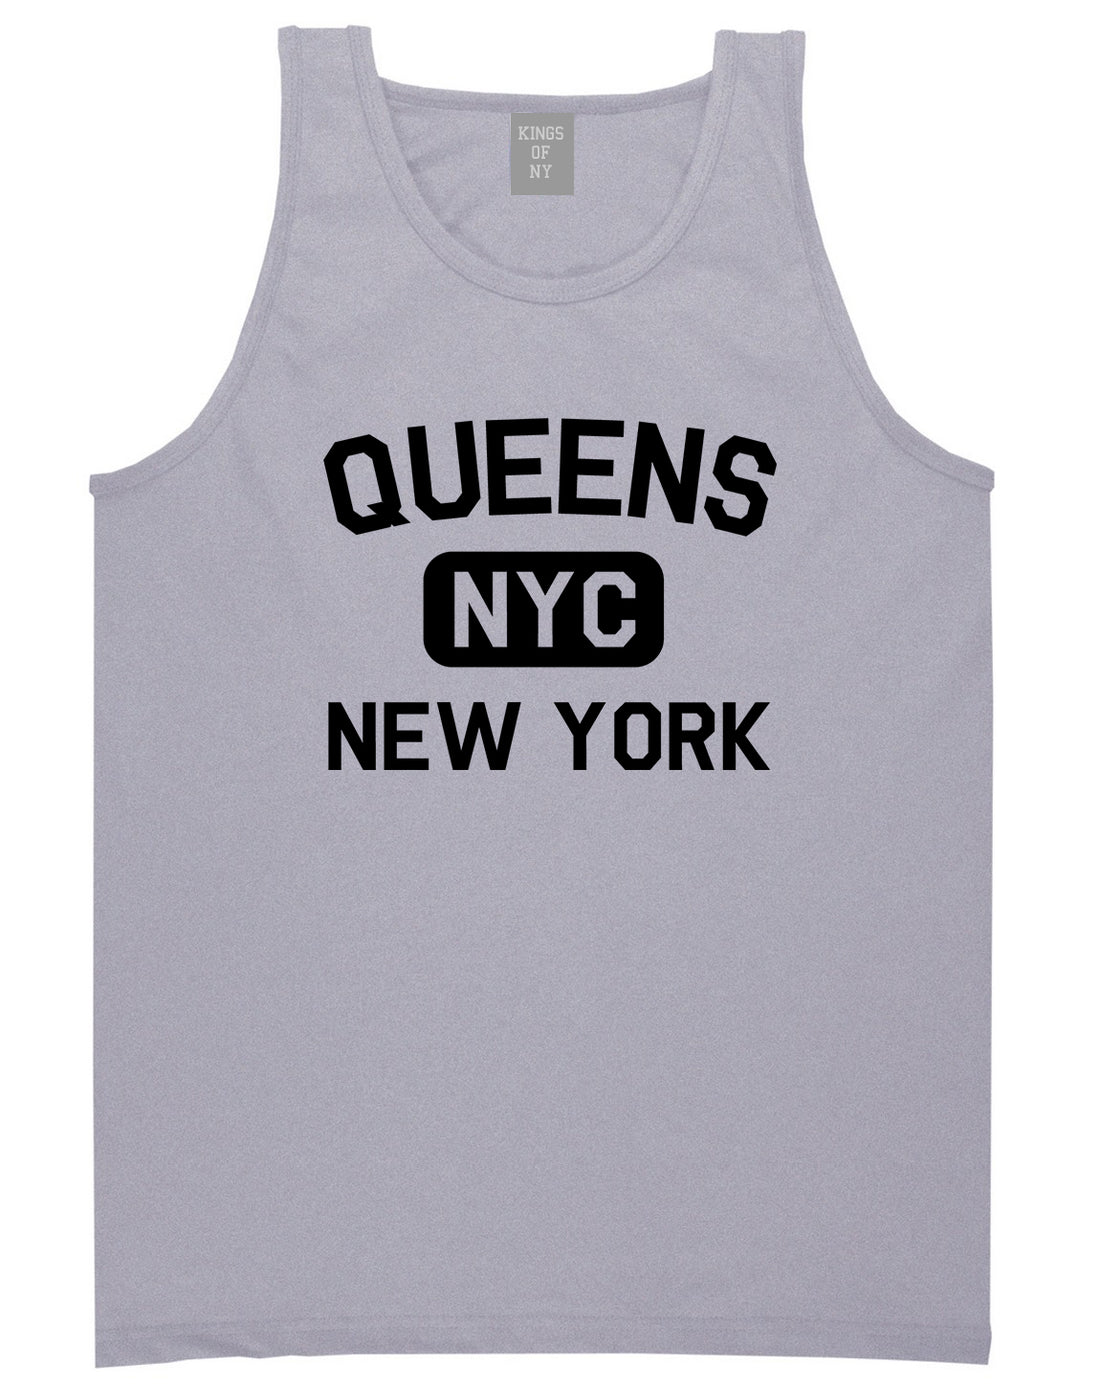 Queens Gym NYC New York Mens Tank Top T-Shirt Grey